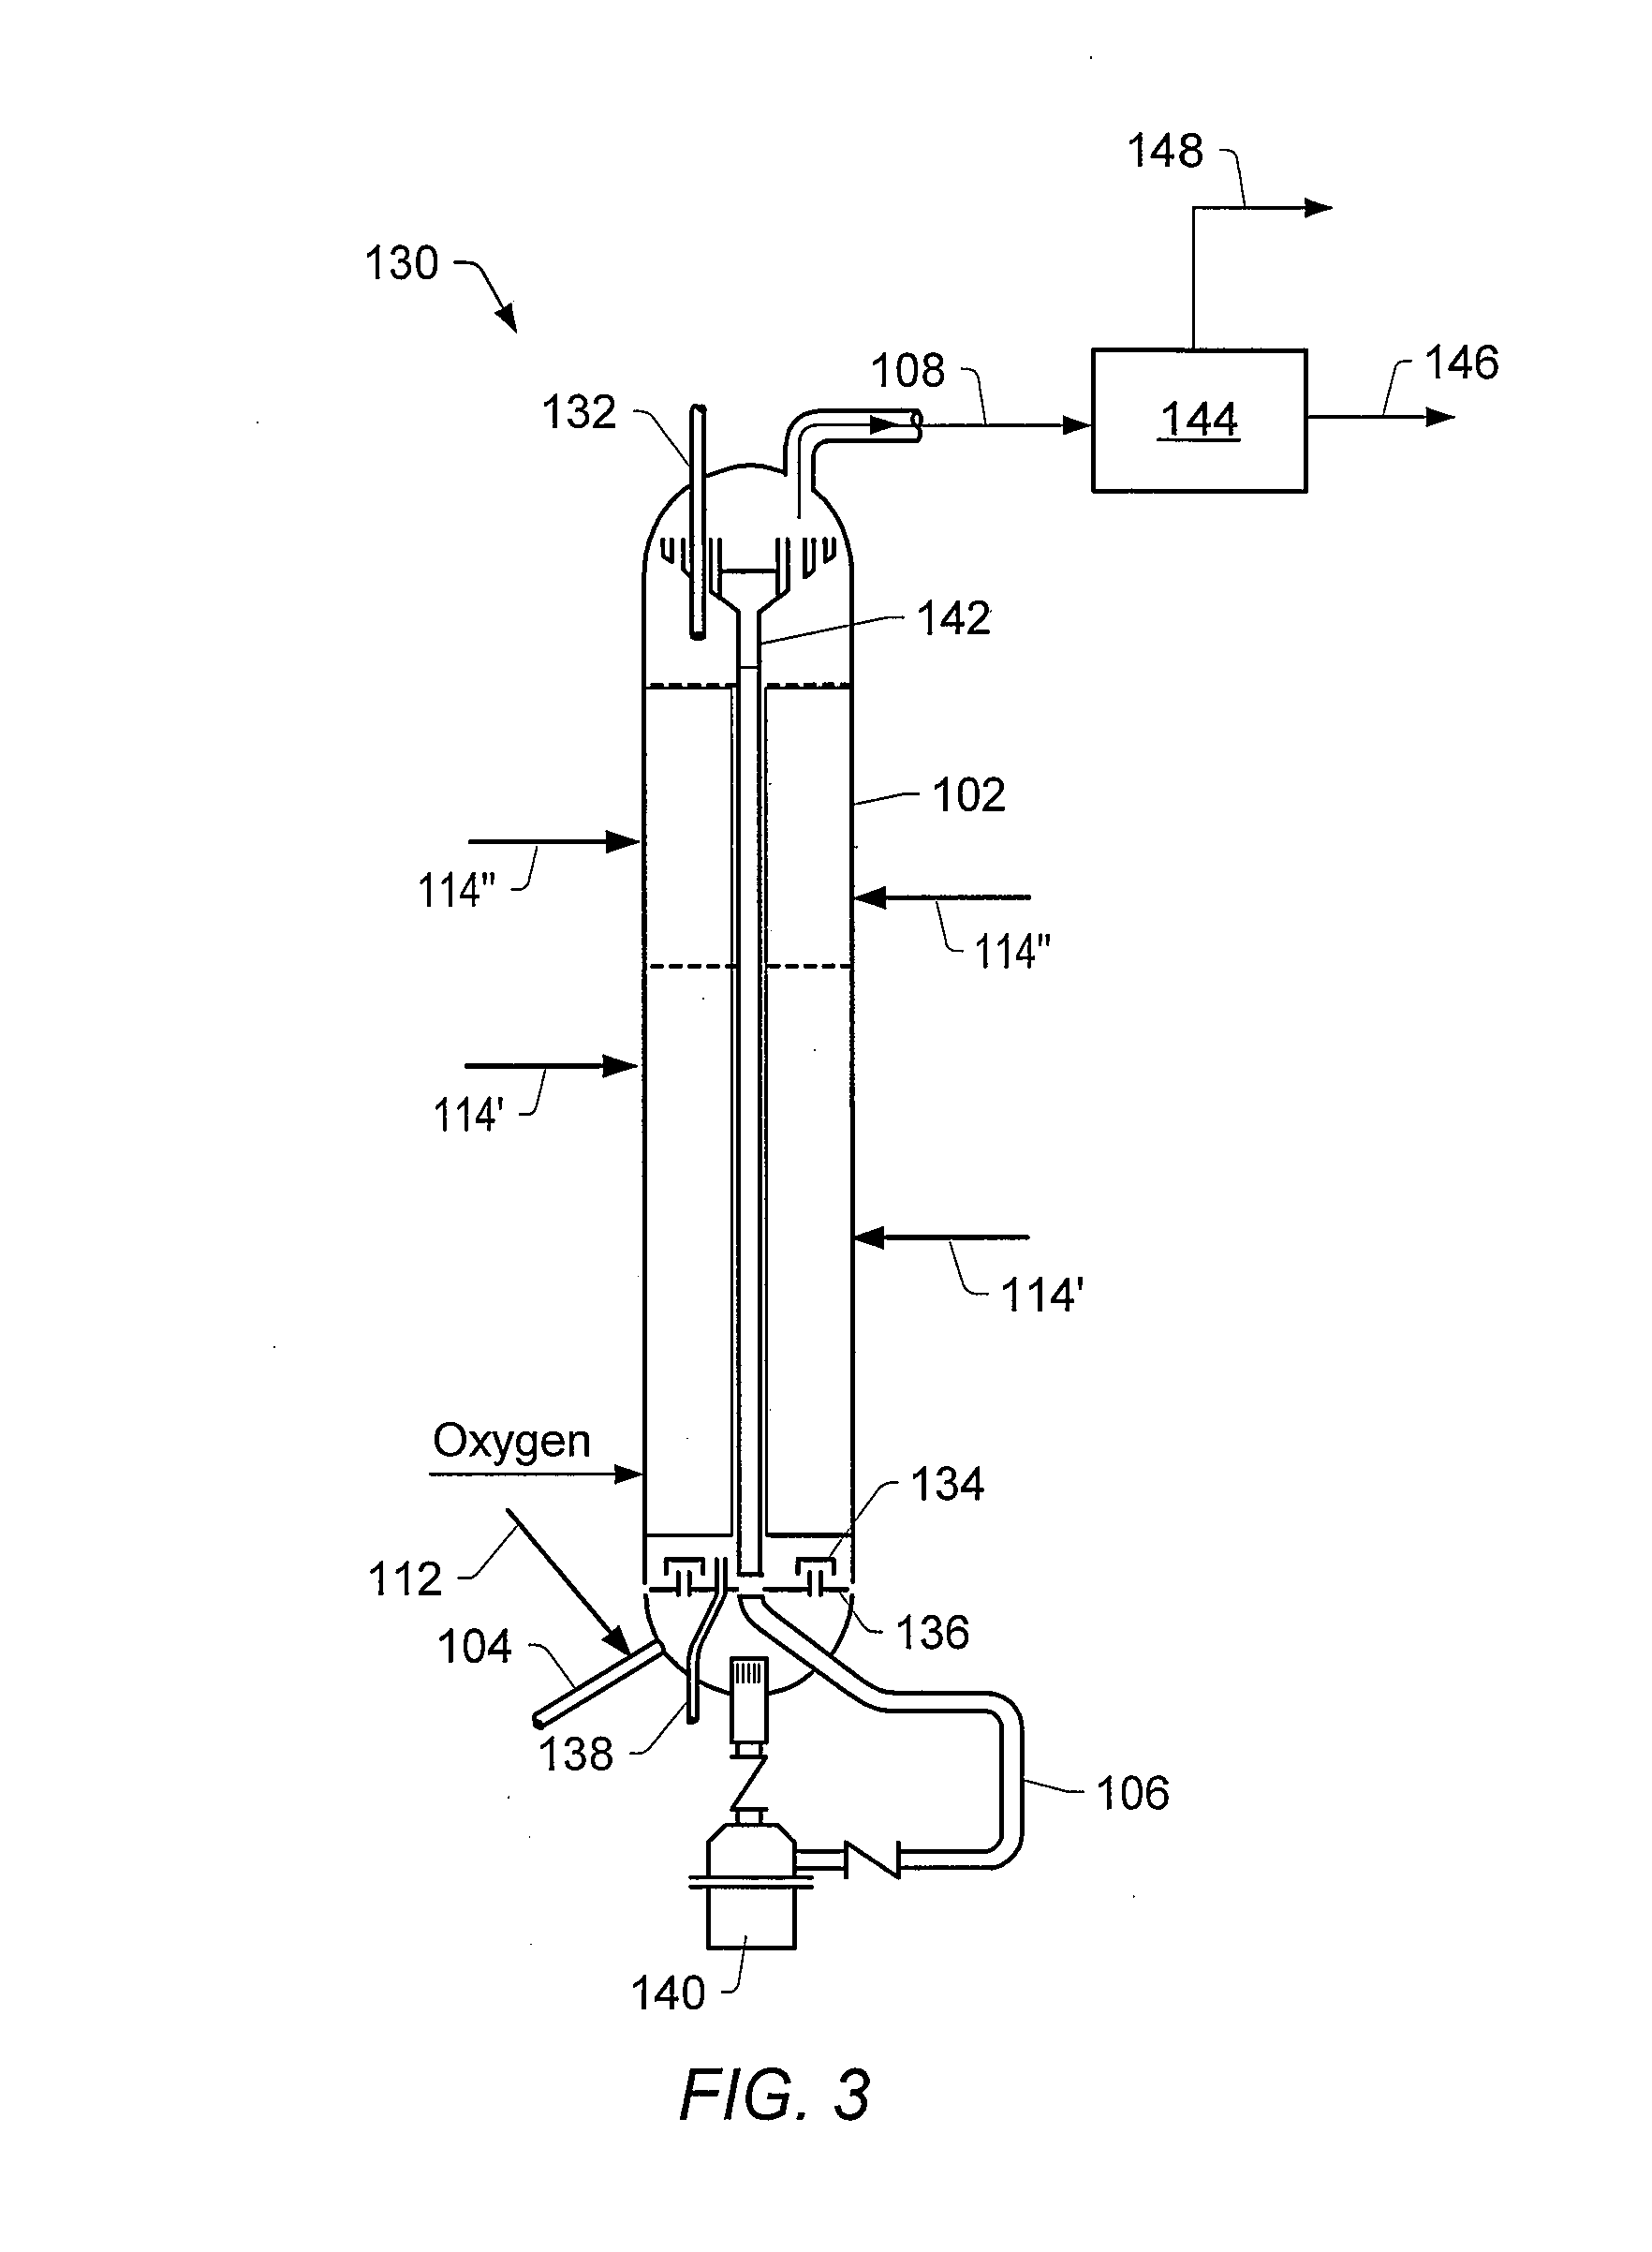 Methods for producing a crude product from selected feed